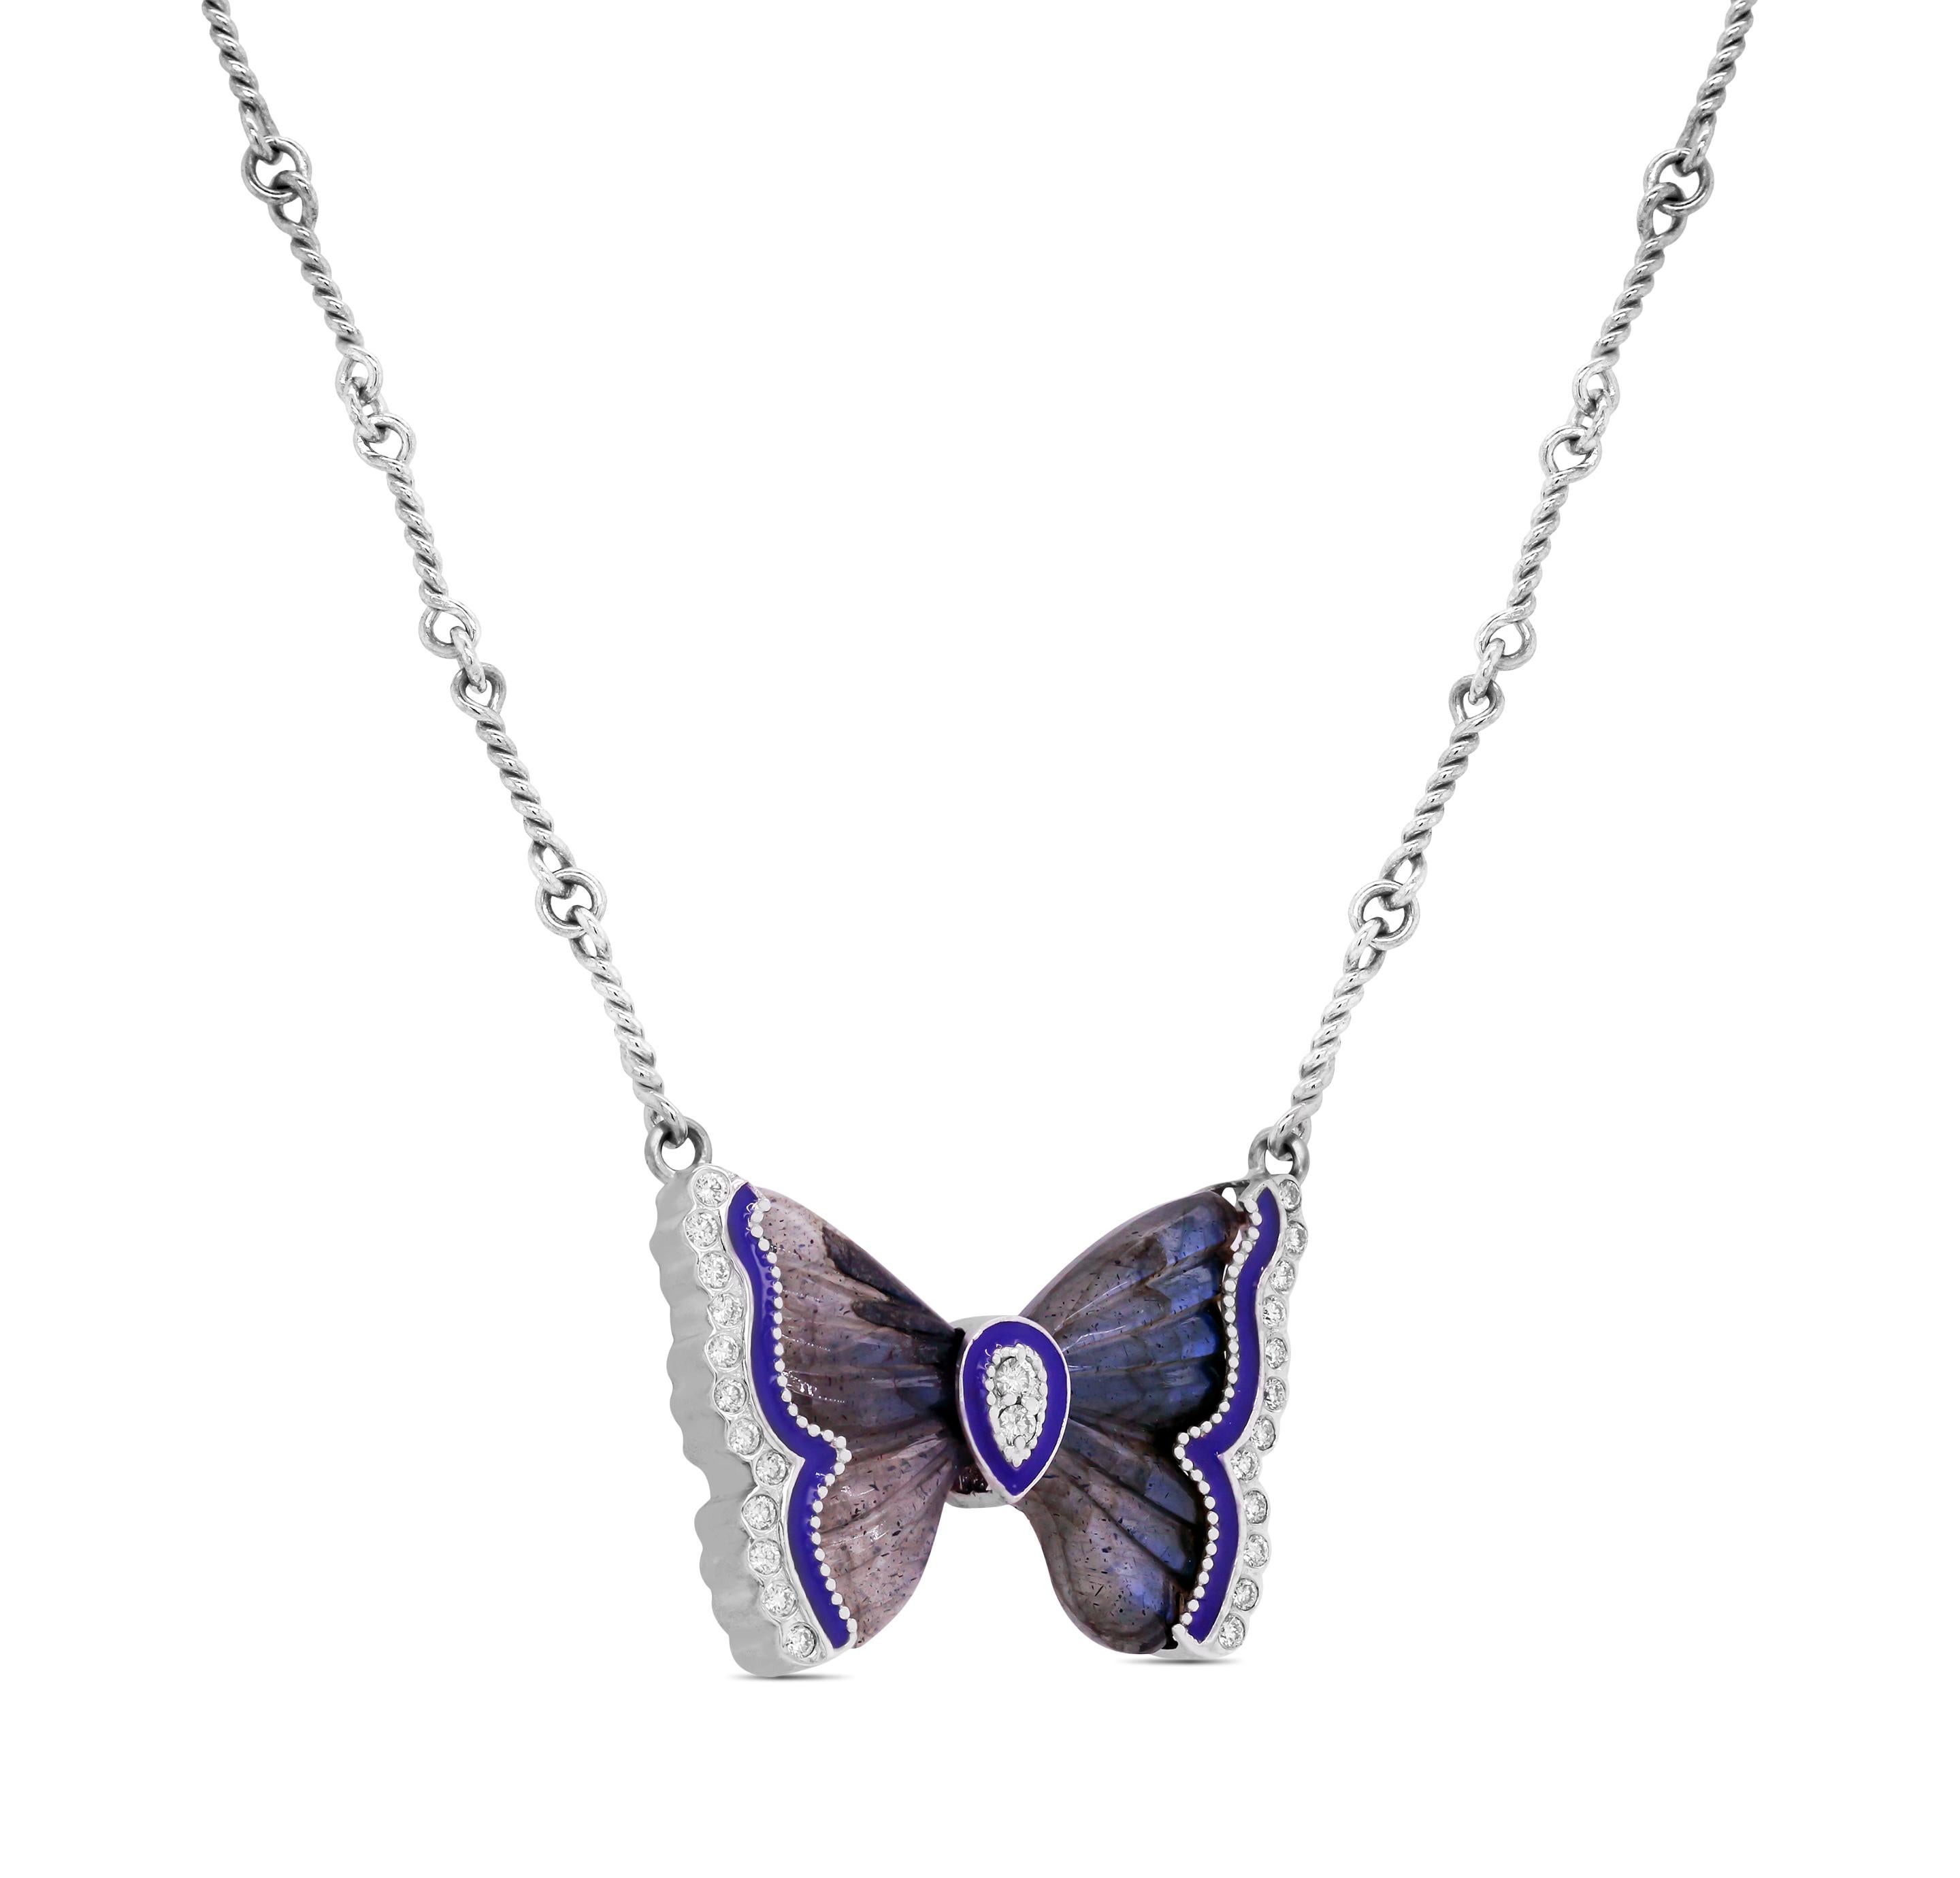 18K Yellow Gold and Diamond Butterfly Pendant Necklace with Labradorite and Purple Enamel by Stambolian

This butterfly is from the 2020 Spring Stambolian collection and features two special cut Labradorites framed with purple enamel and